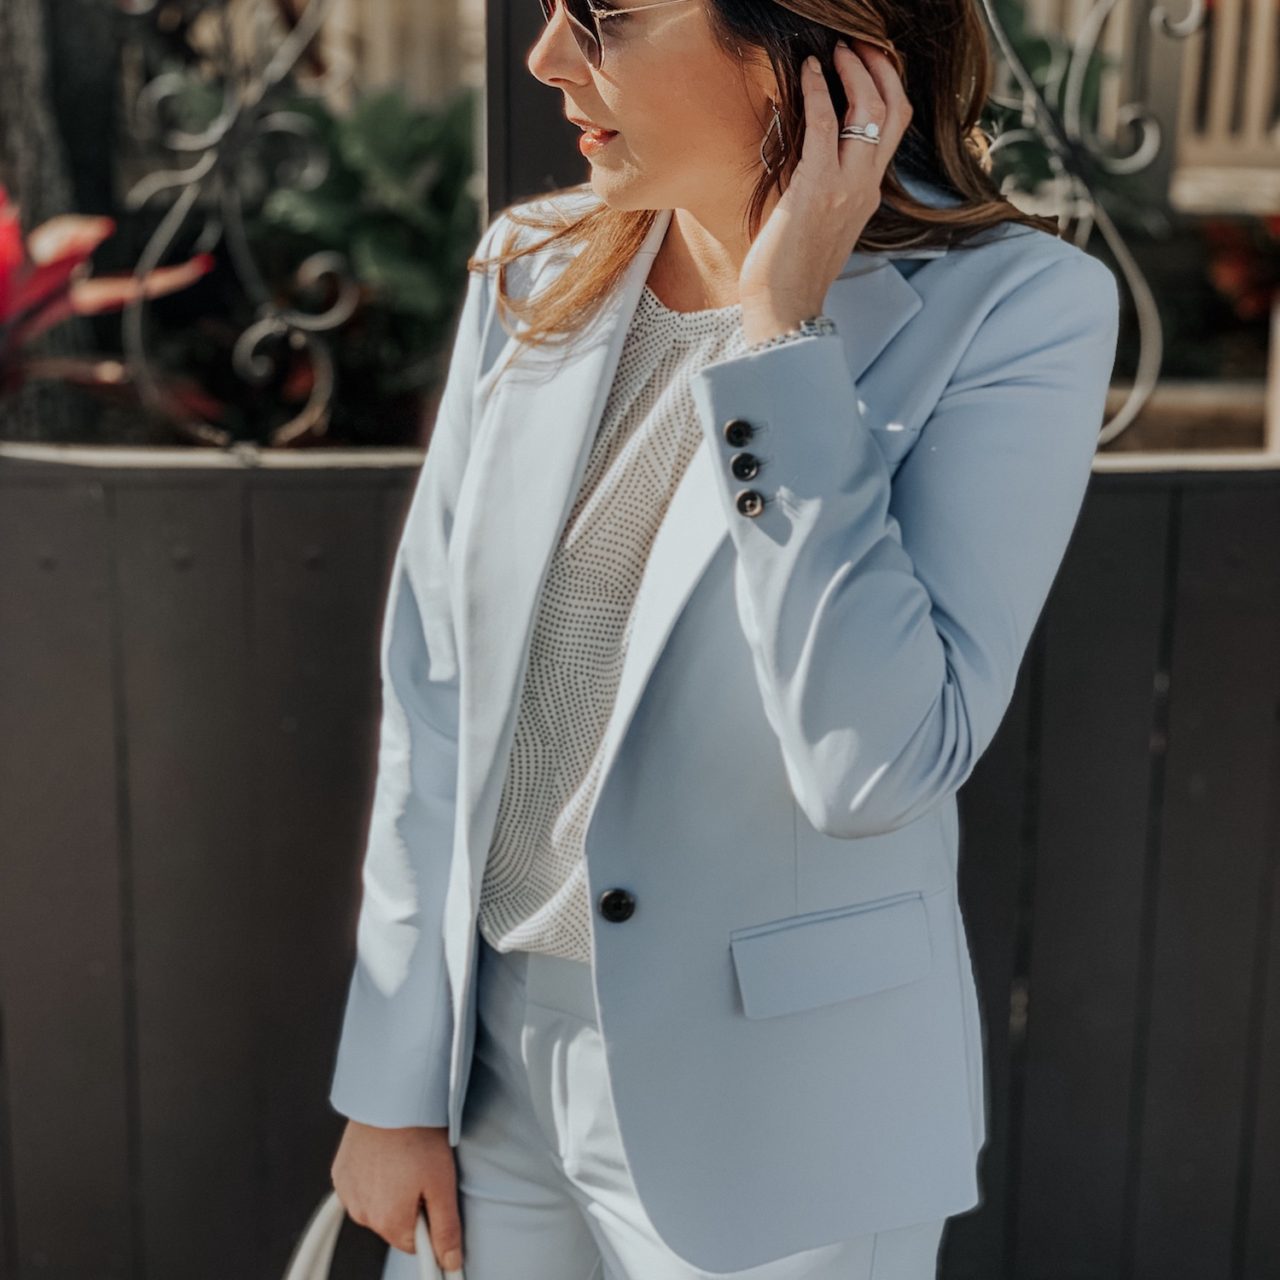 An Affordable Spring Suit from Target